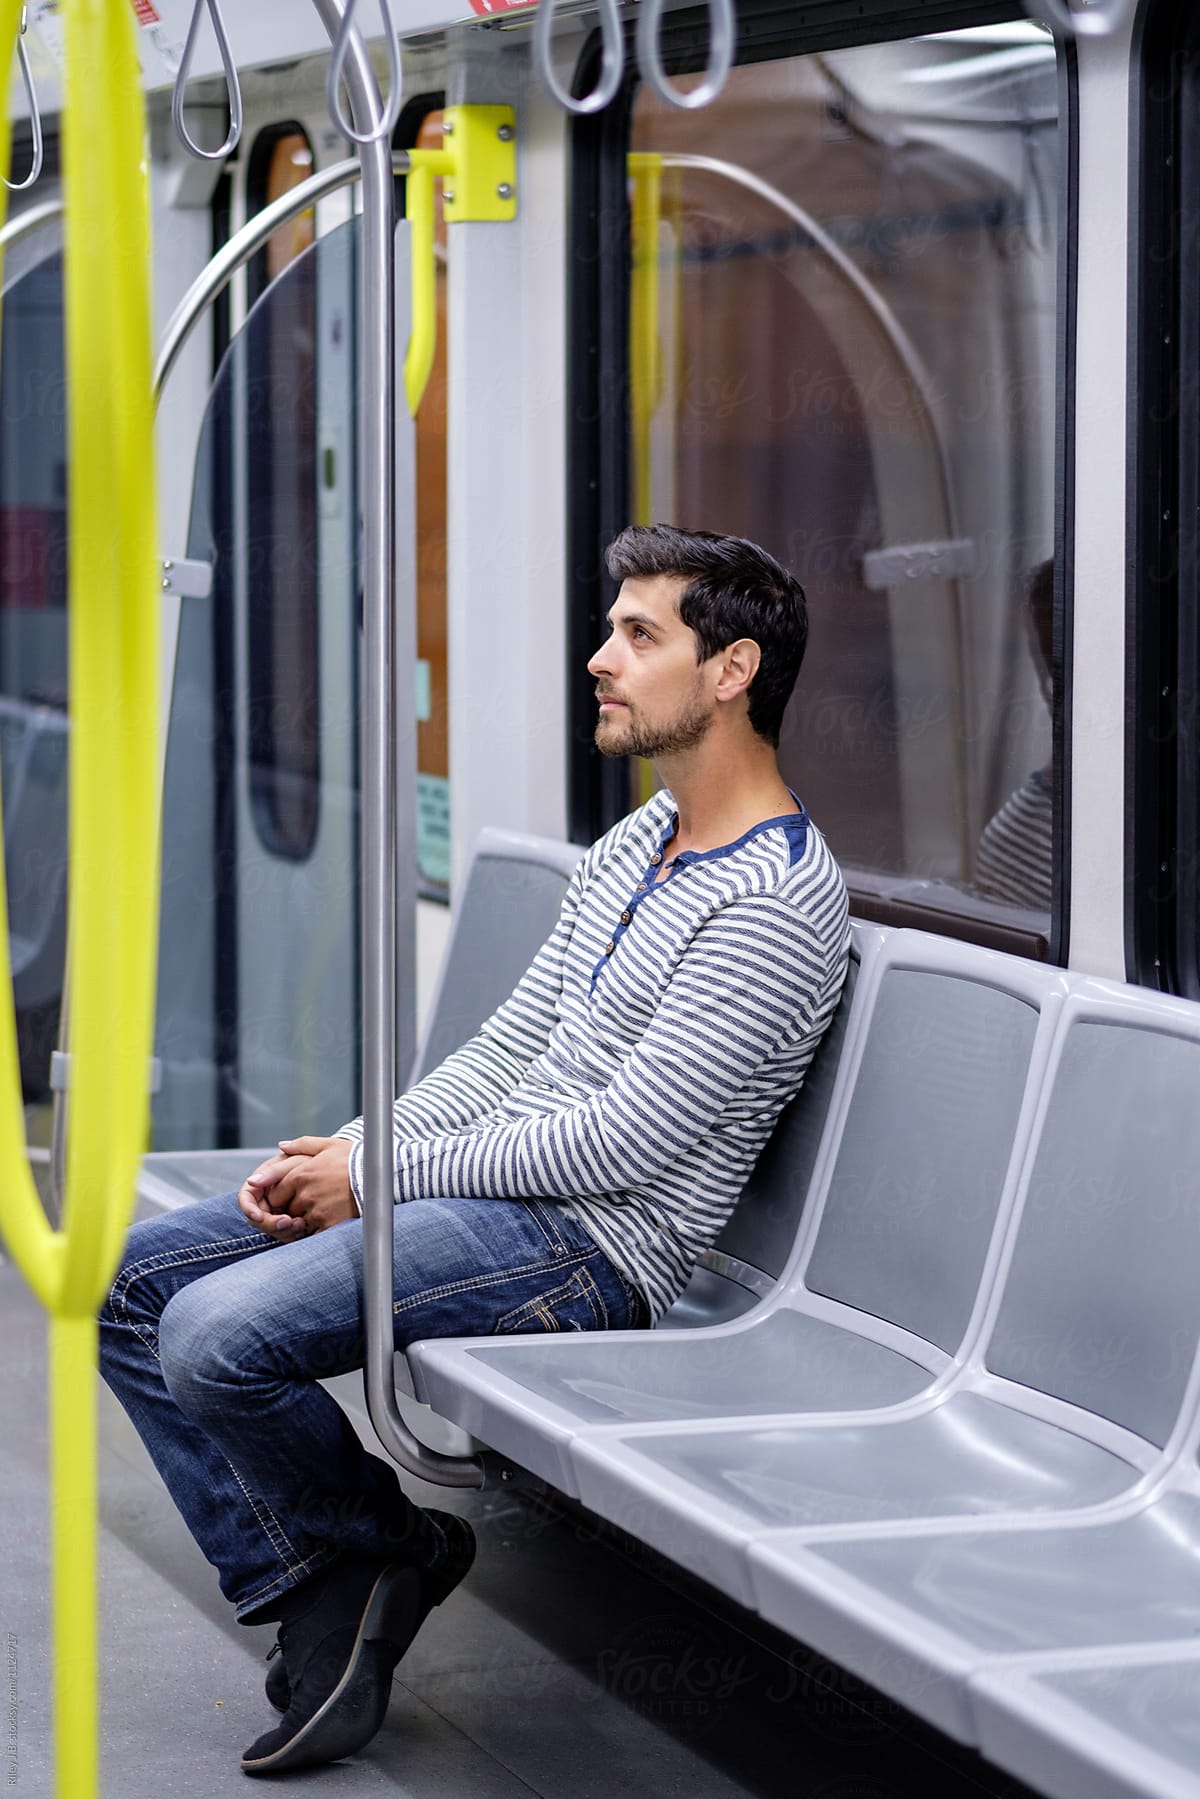 A young man sitting alone while commuting by train